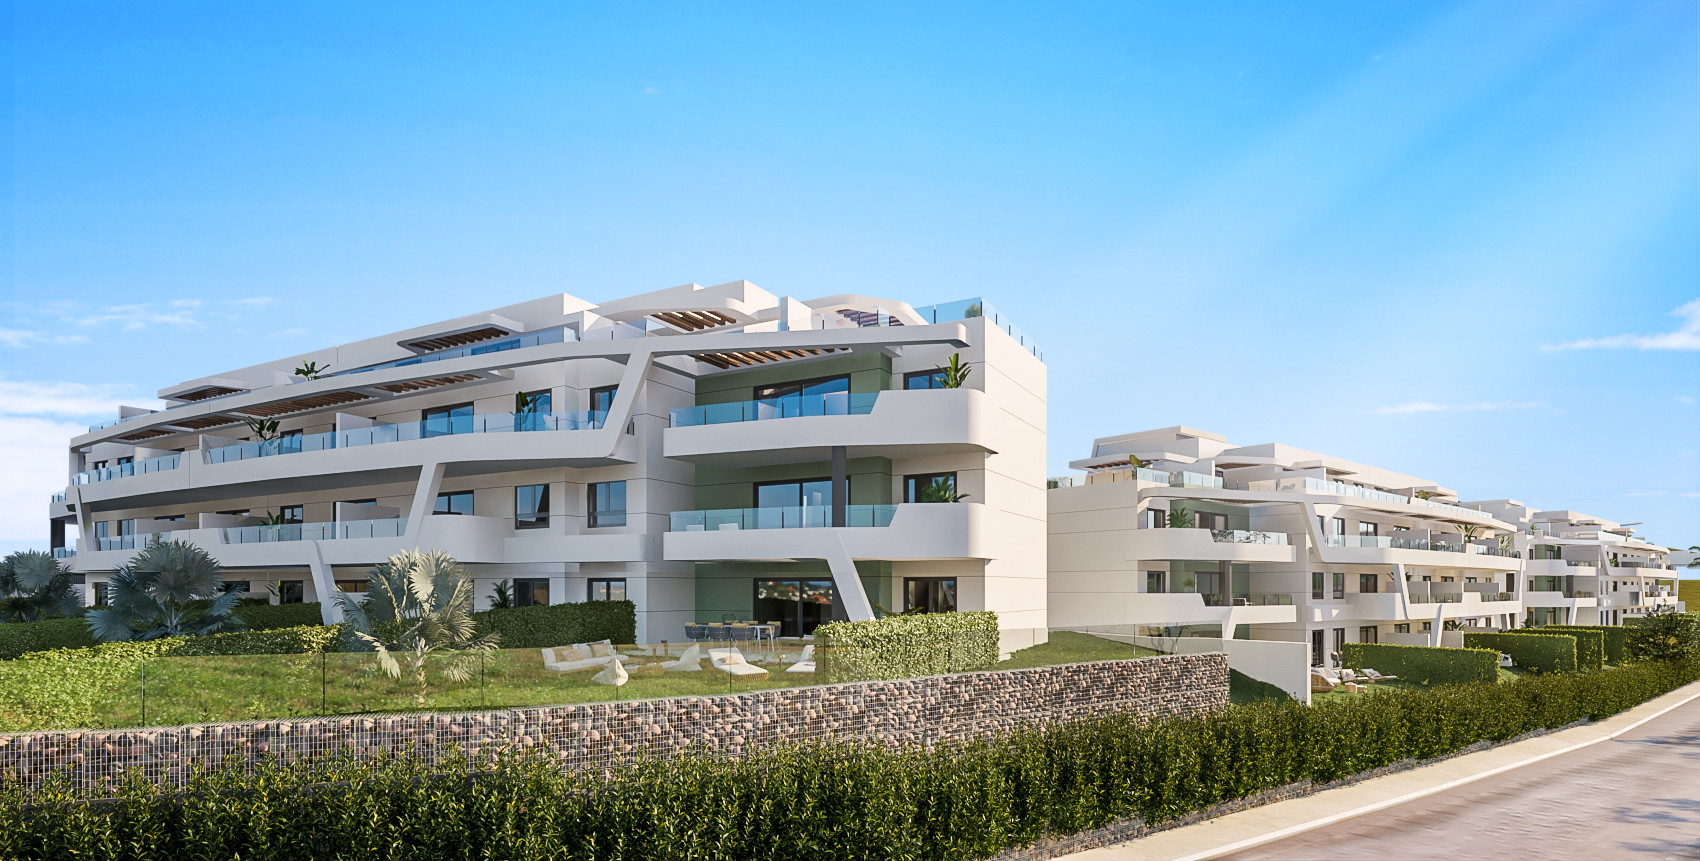 Ipanema: Modern flats and penthouses with privileged location in La Cala de Mijas. | Image 1